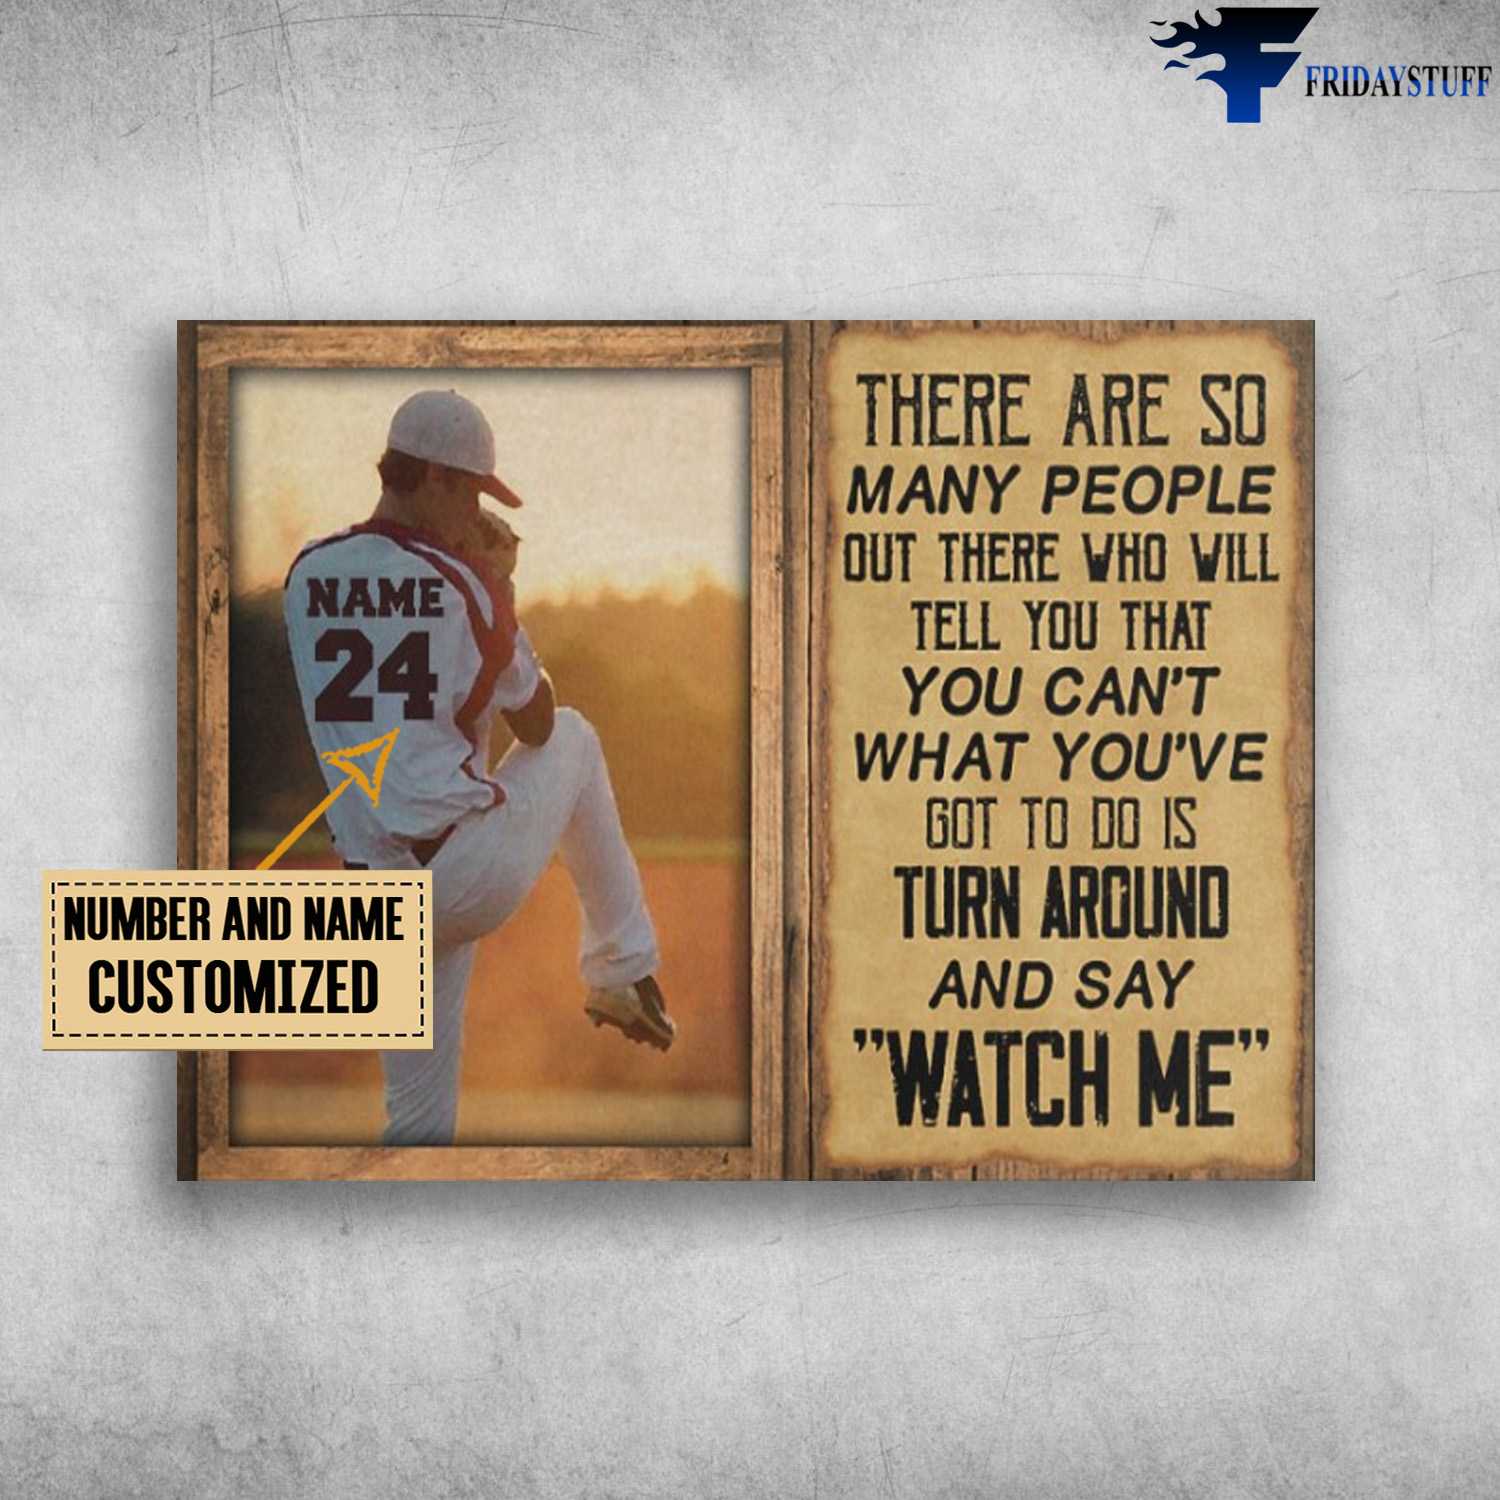 Baseball Poster, Baseball Lover, There Are So Many People Out There, Who Will Tell You Can't, What You've Got To Do Is Turn Around, And Say Watch Me